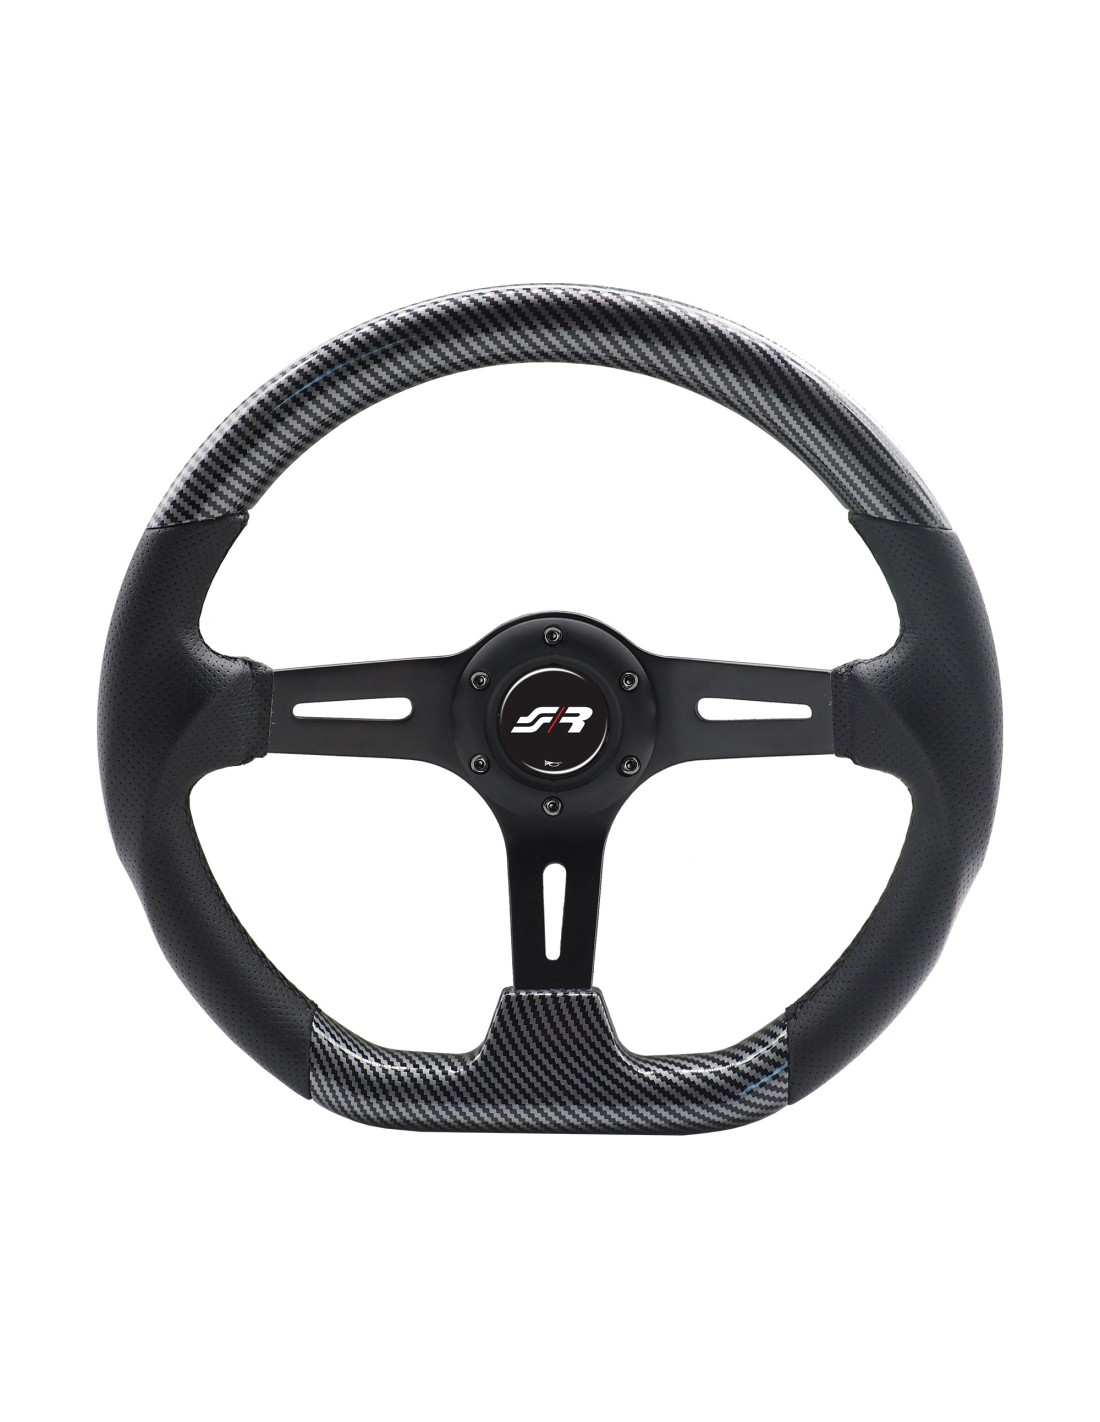 Volante sportivo Tuning calice ecopelle nera carbon look GIAU 350mm